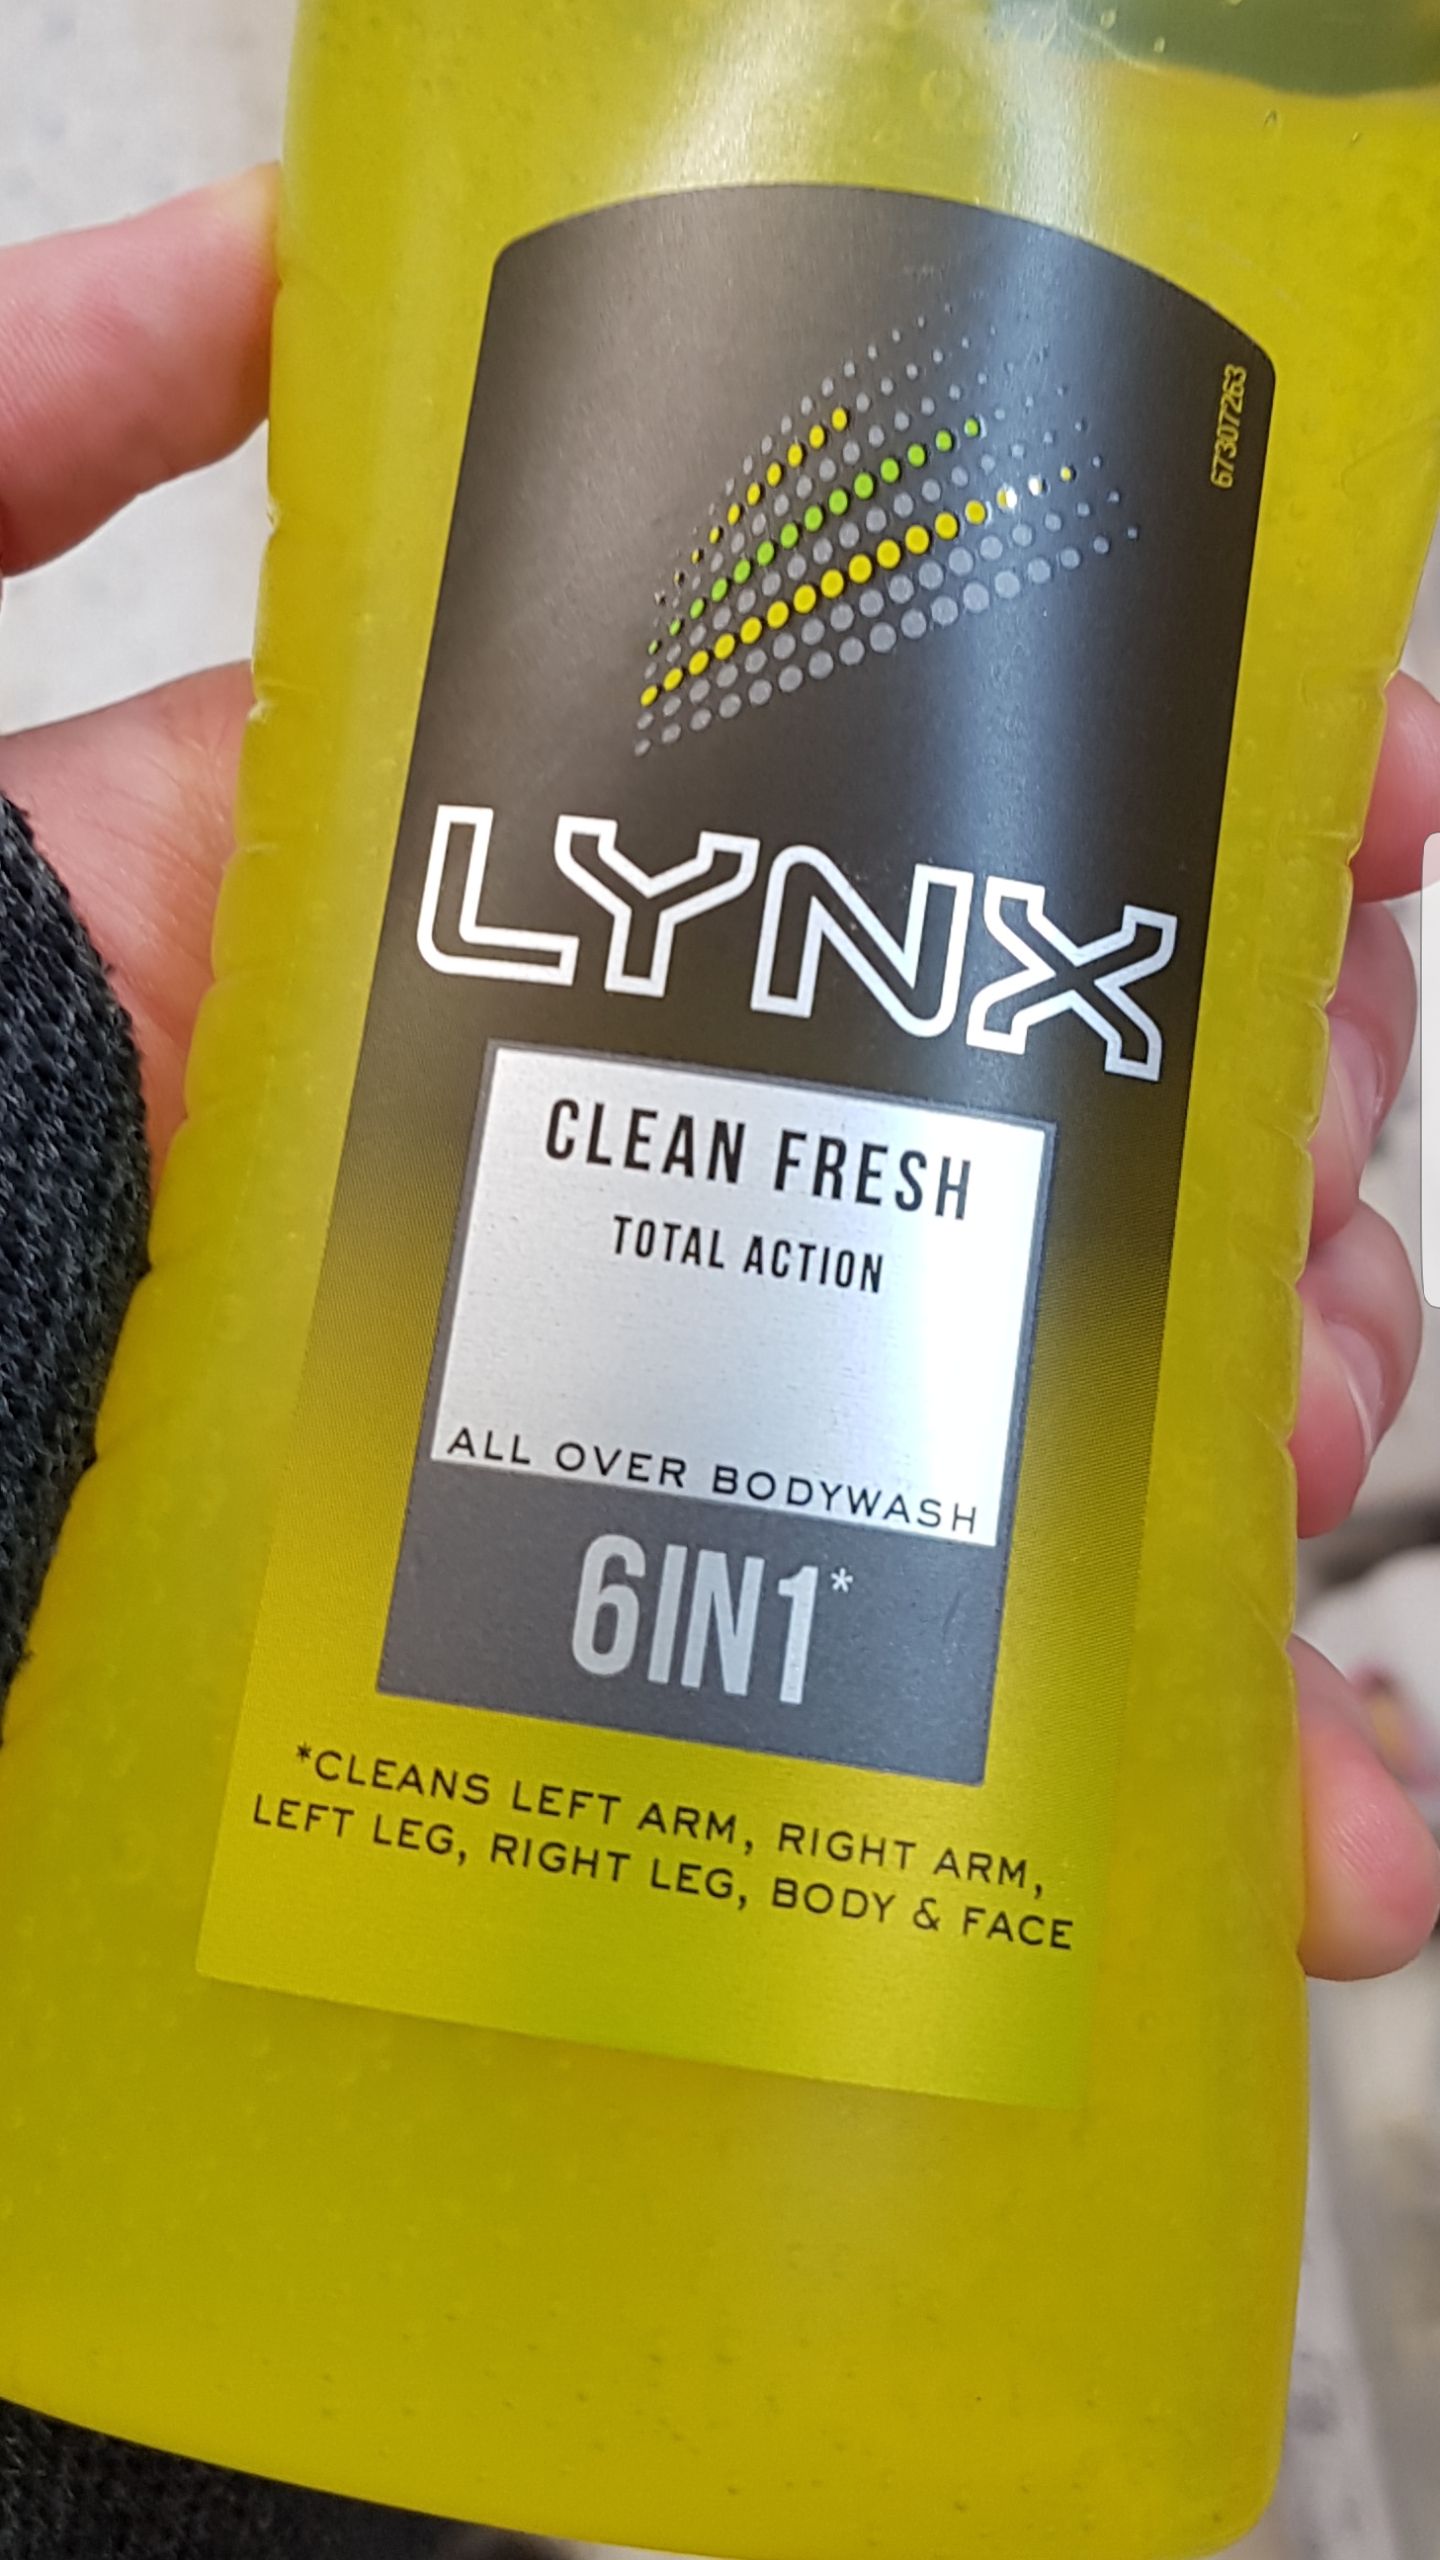 Wow Lynx has really gone all out on this one...